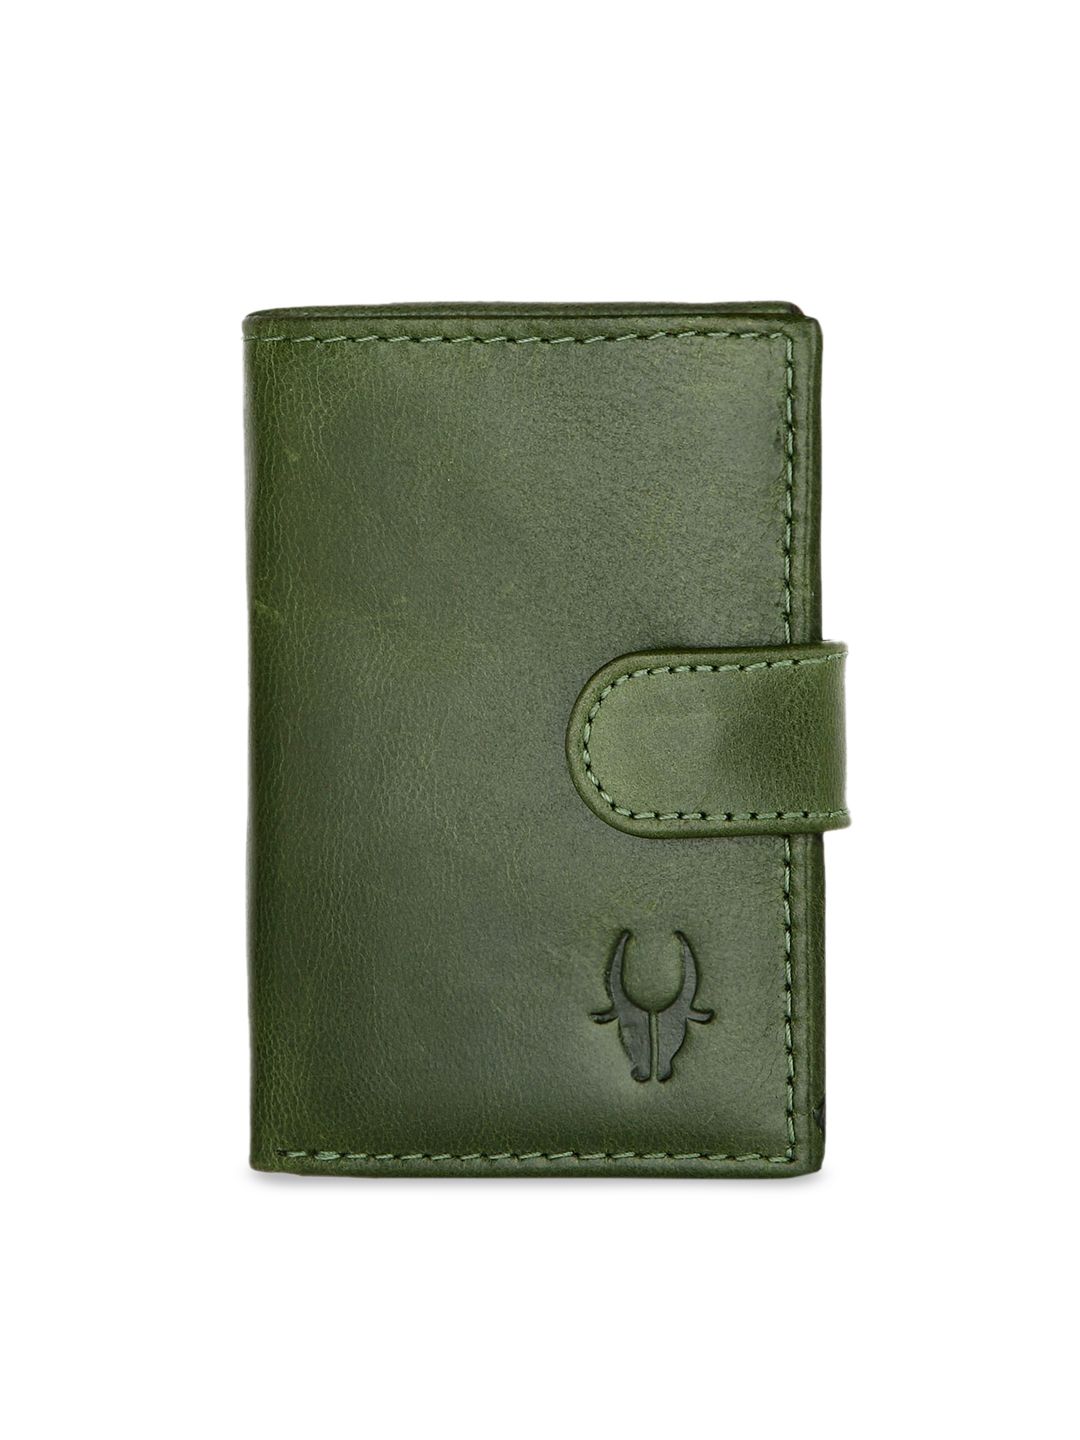 WildHorn Unisex Olive Green Solid RFID Genuine Leather Card Holder Price in India